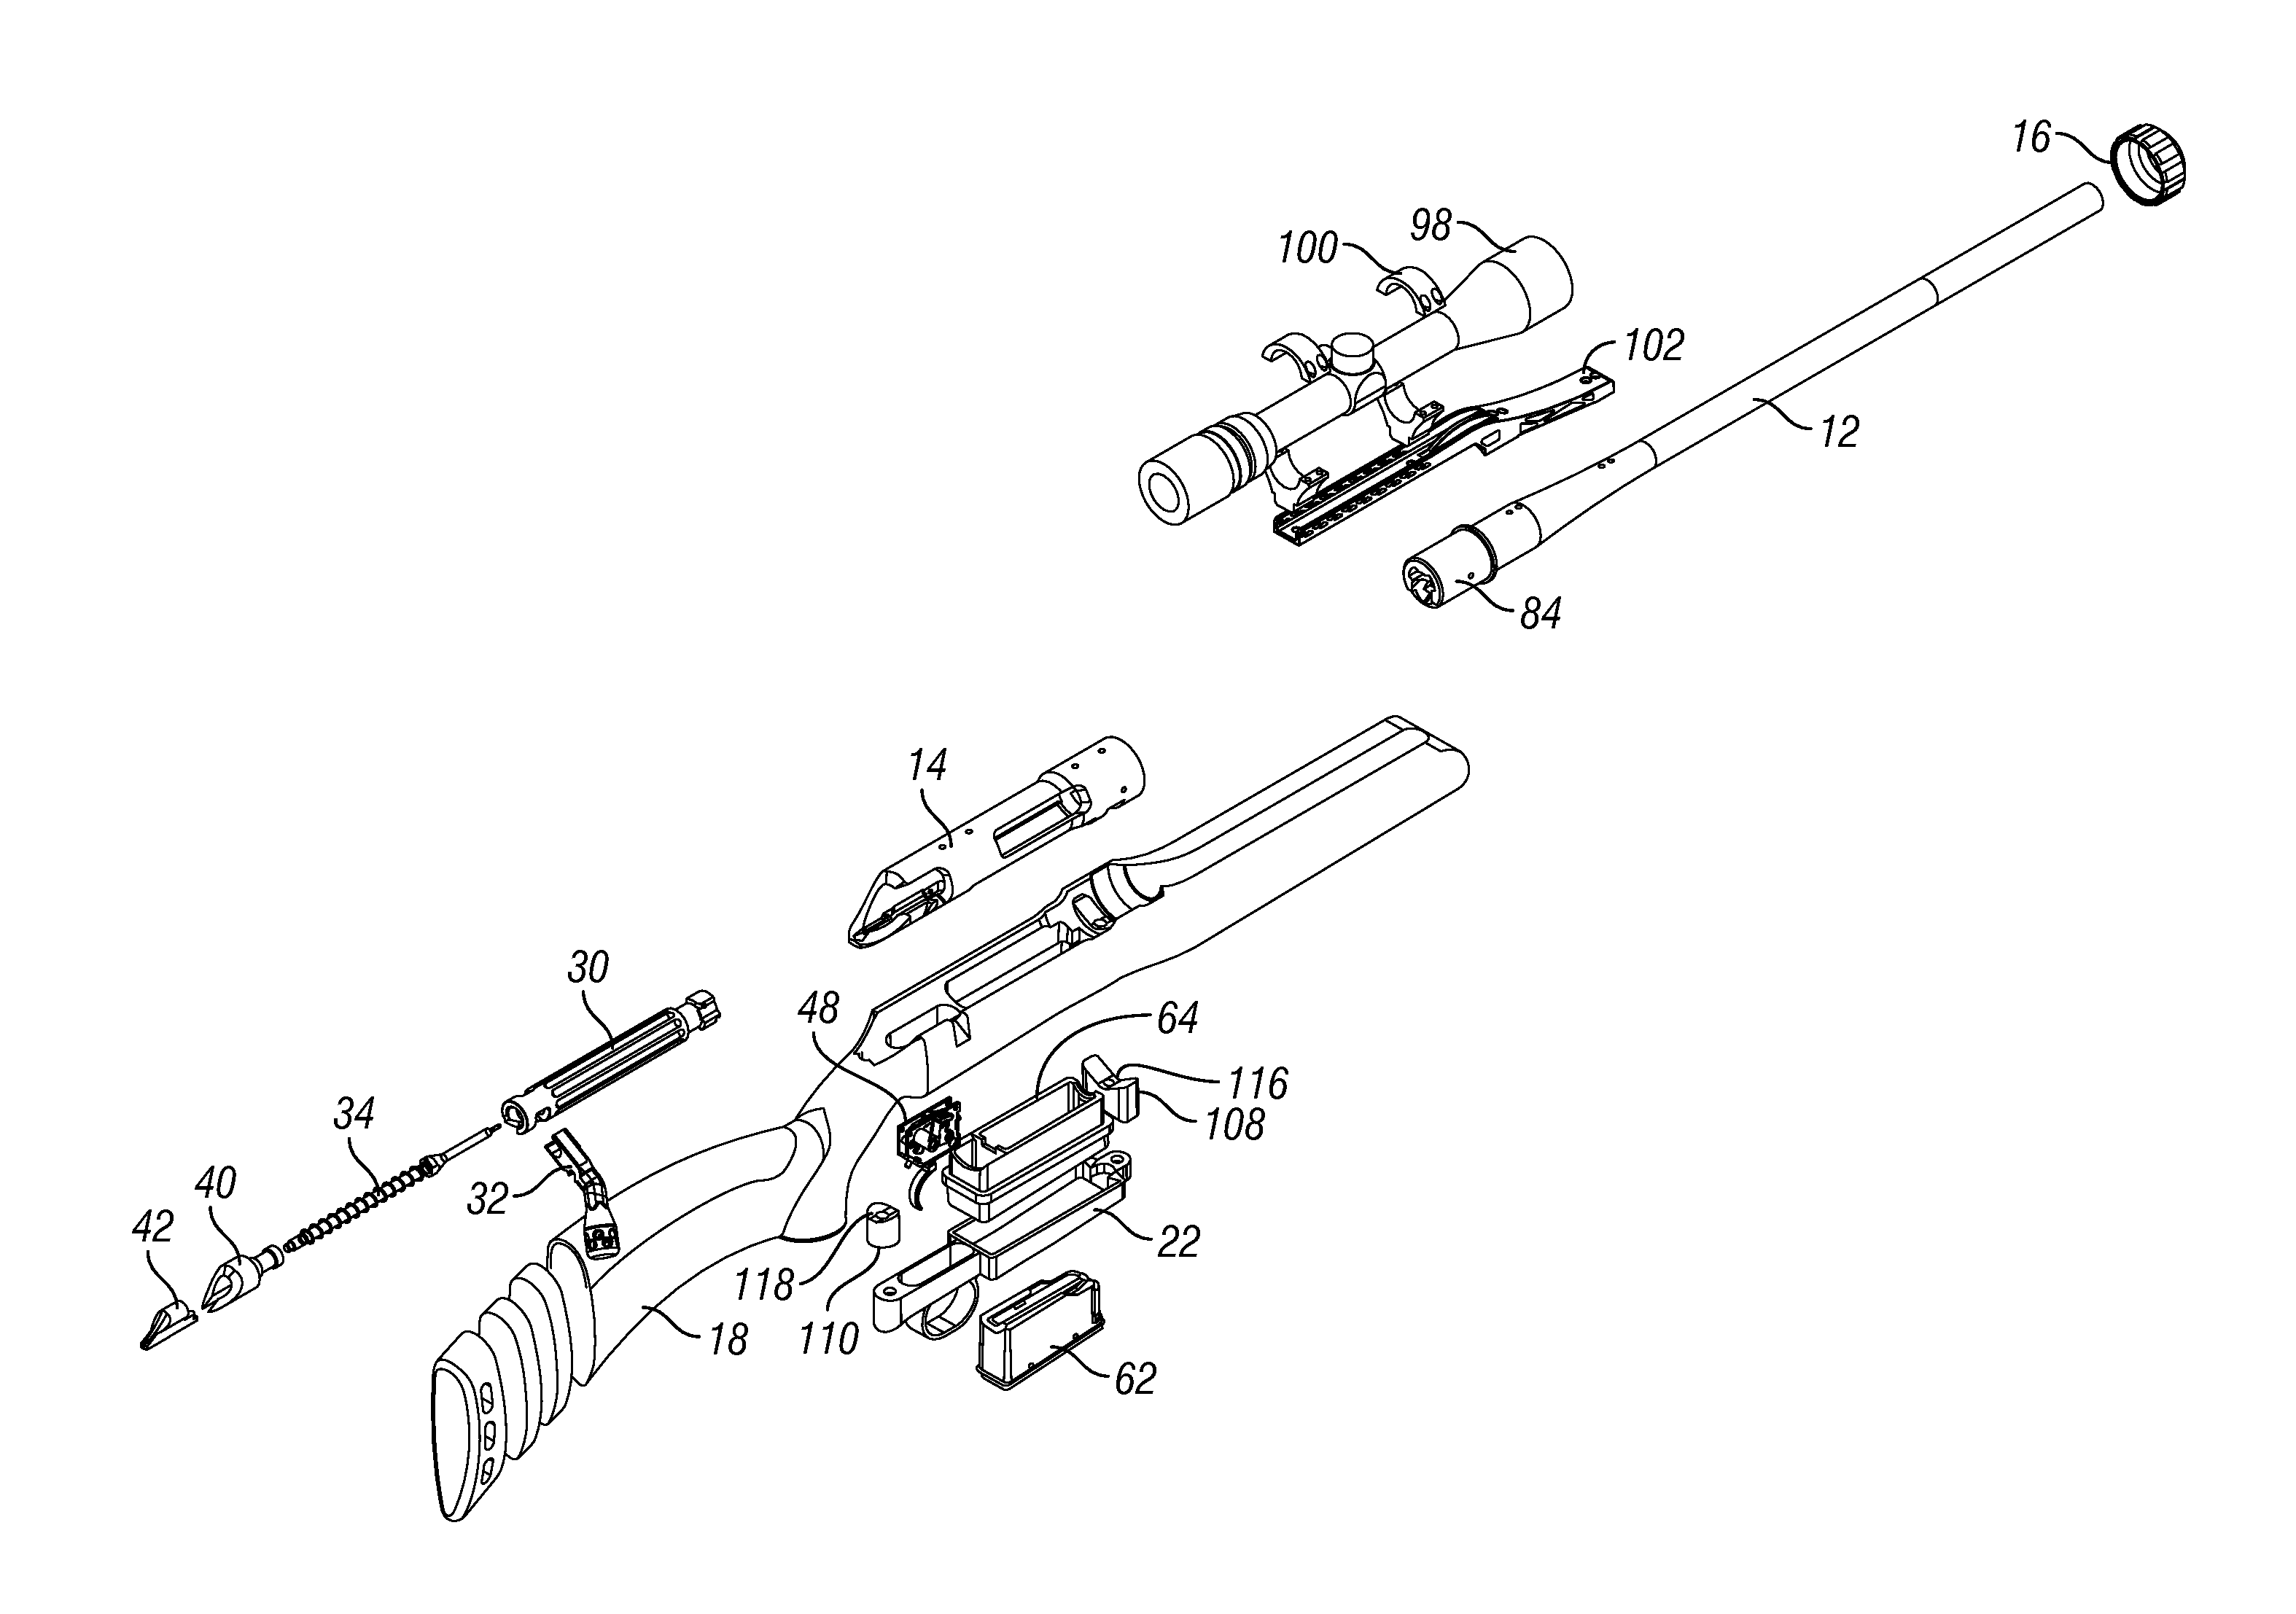 Multi-caliber bolt-action rifle and components